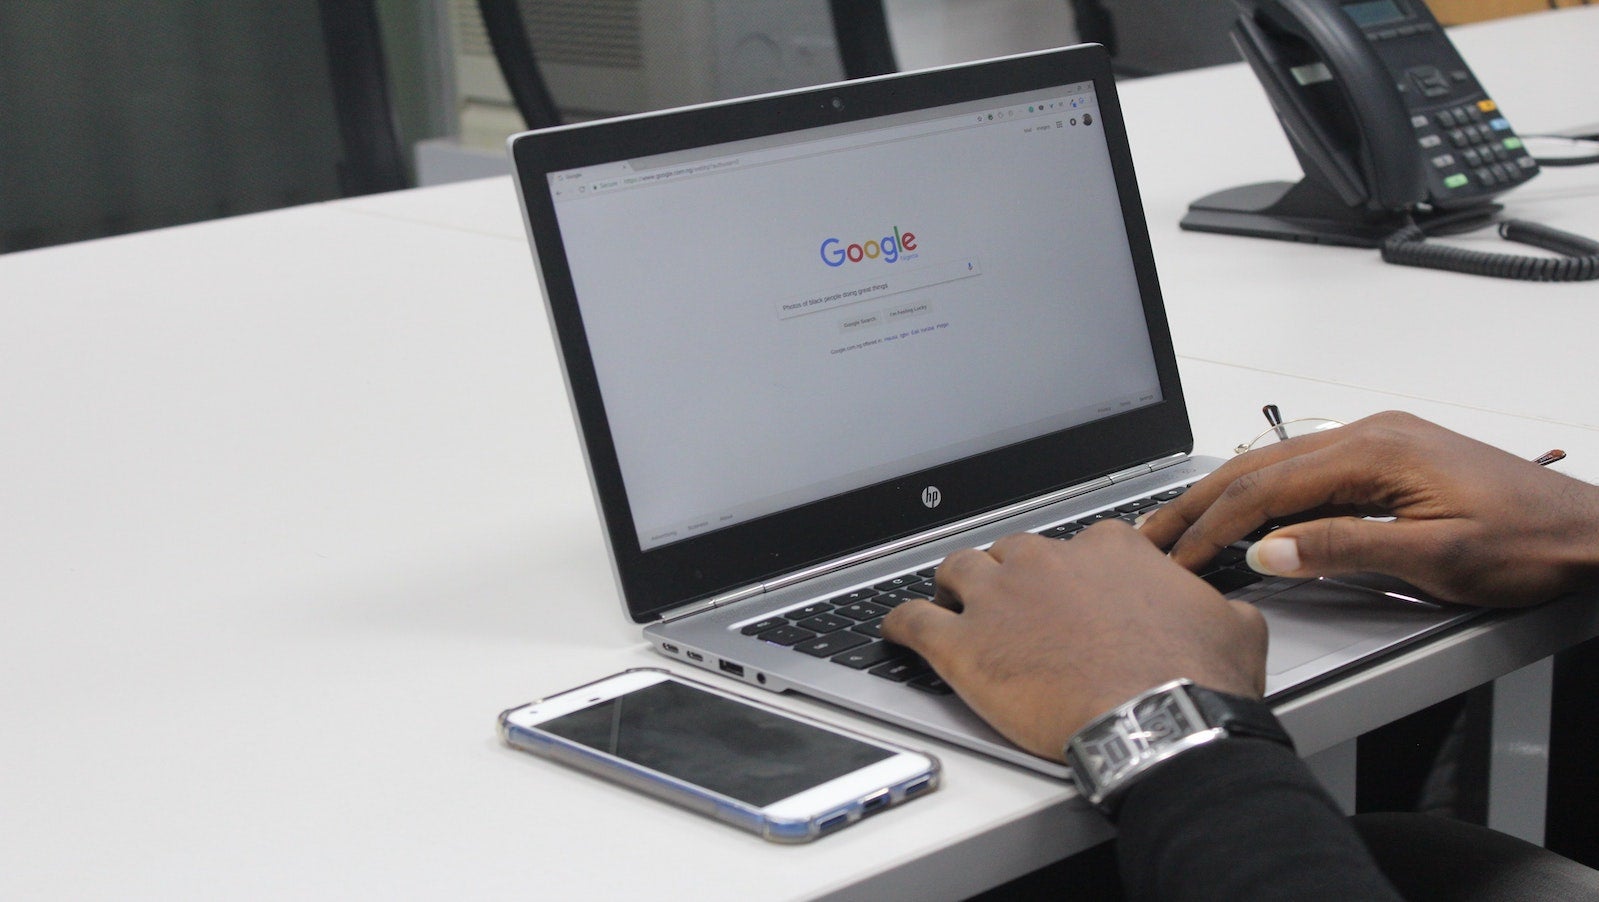 Picture of a laptop on a table with a Google search engine on the screen, demonstrating SEO copywriting ideation.